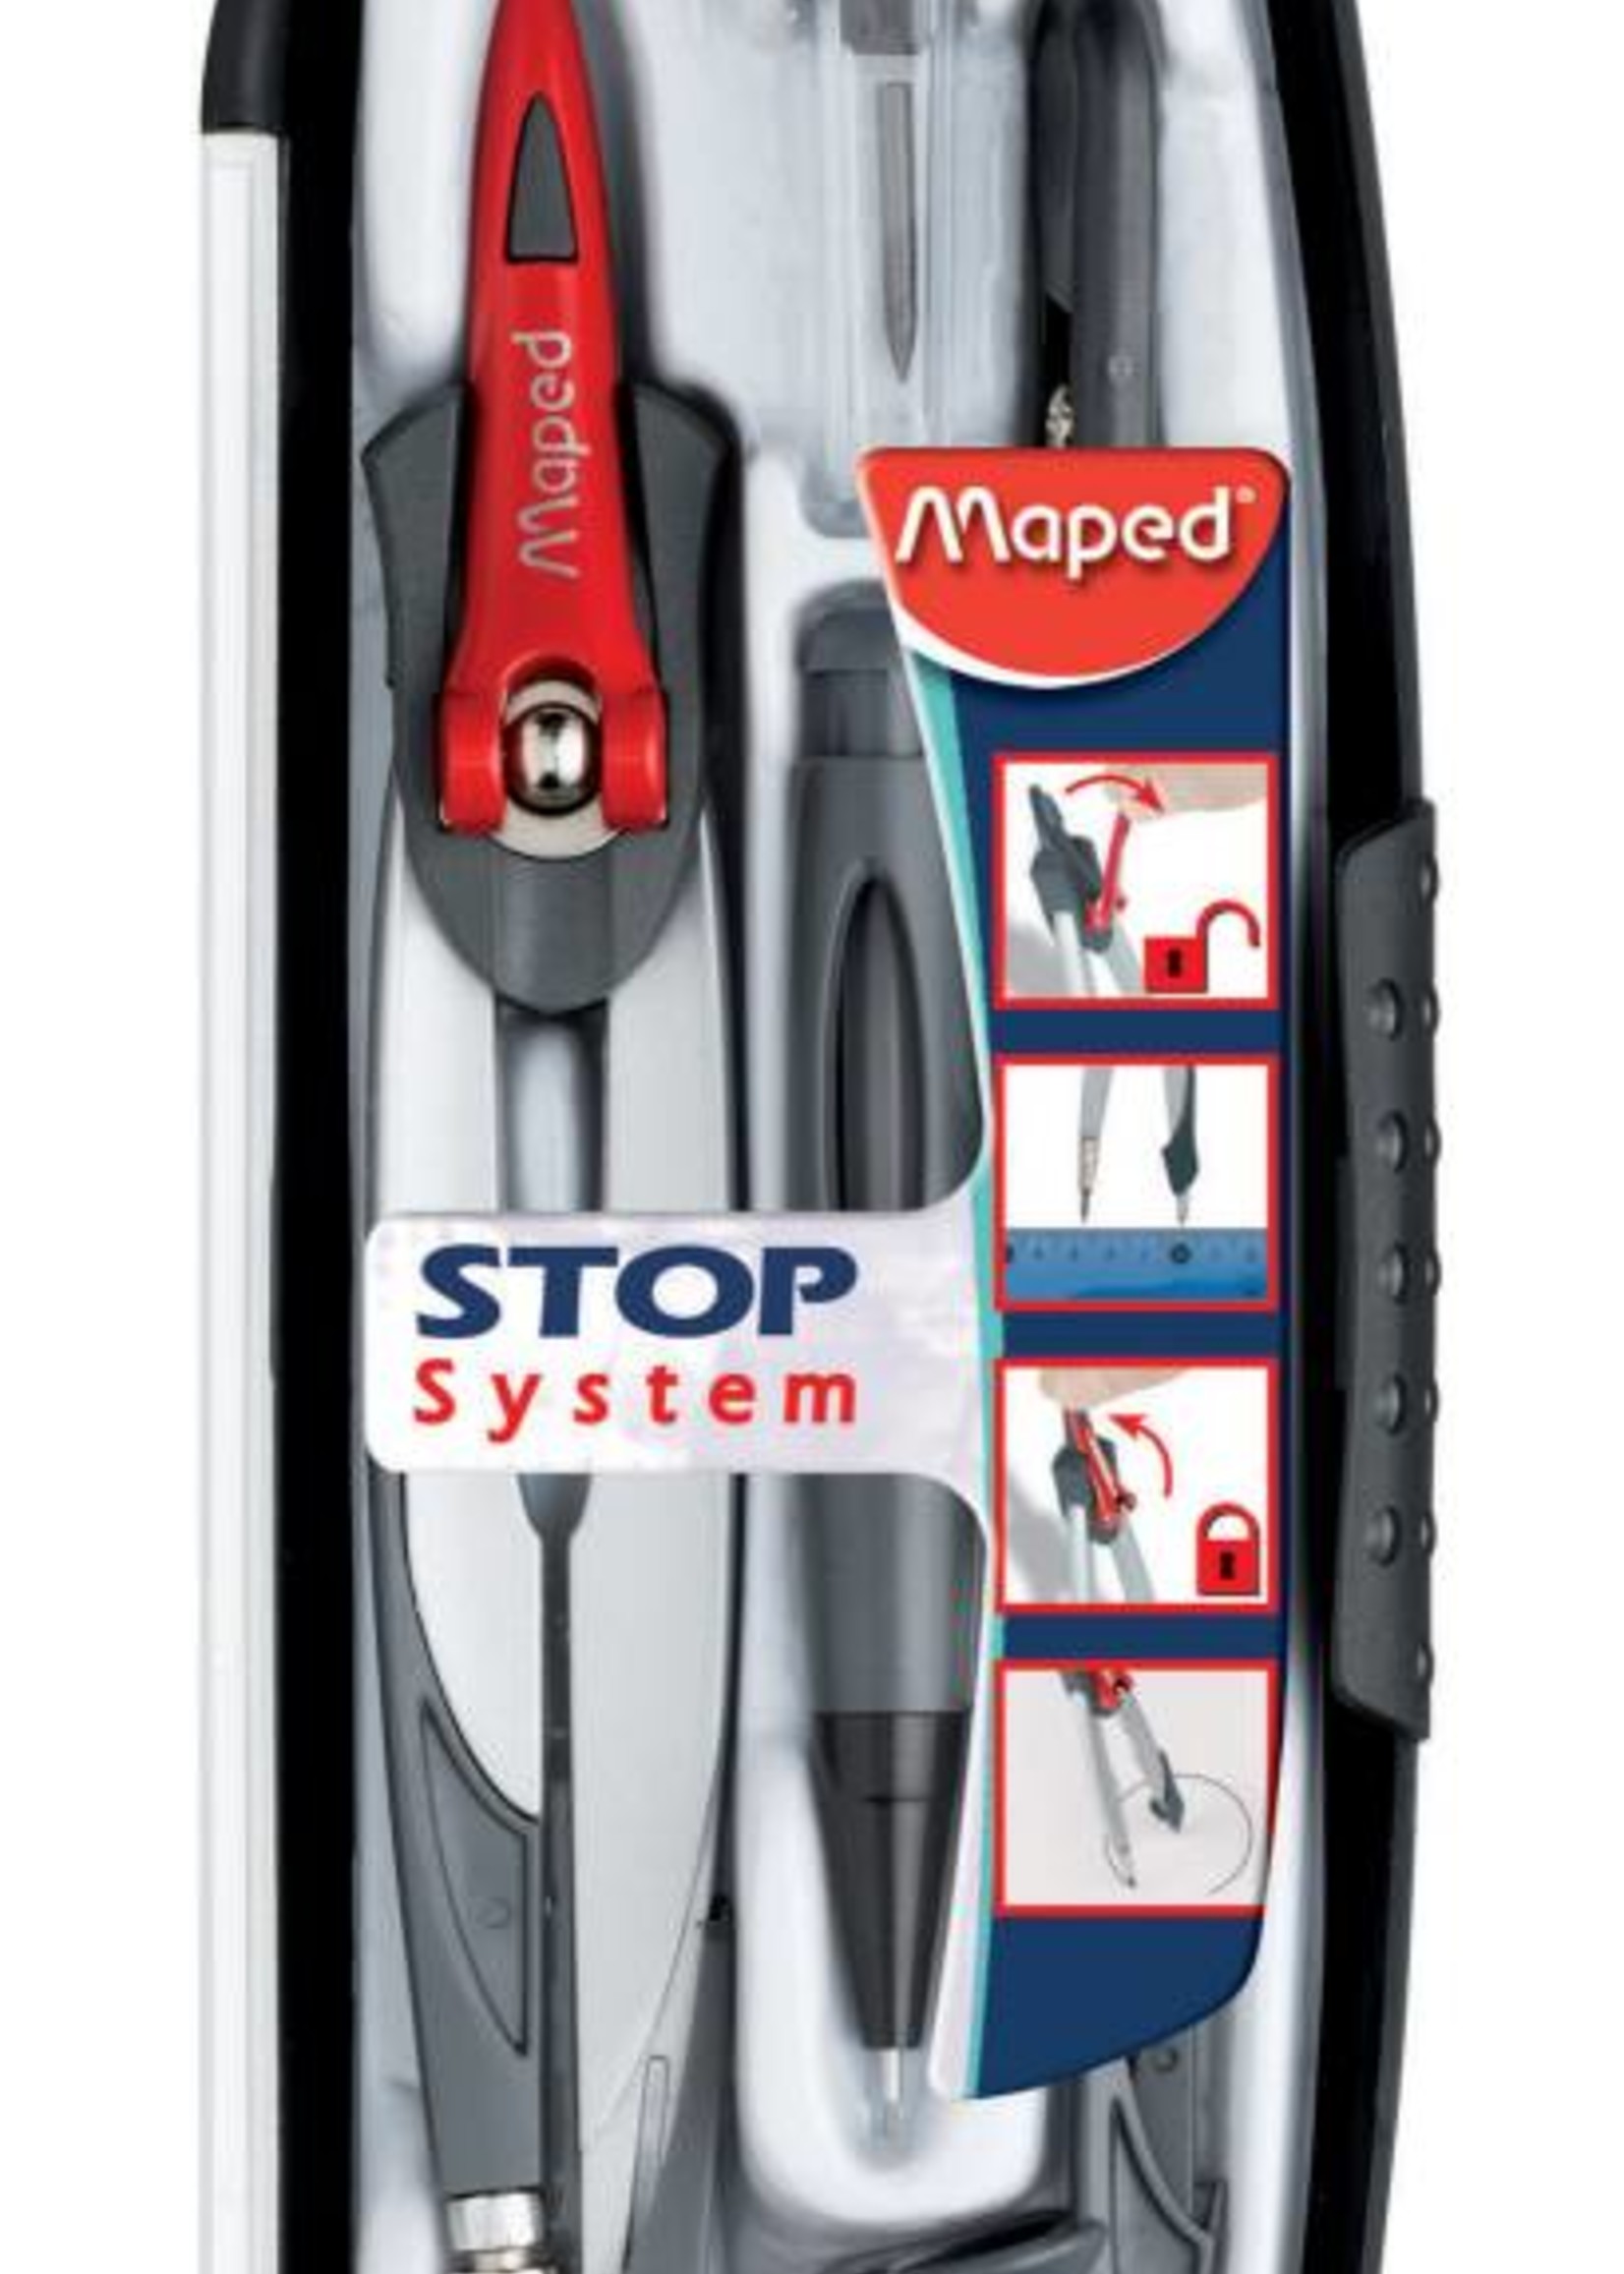 MAPED STOP SYSTEM COMPASS SET/5